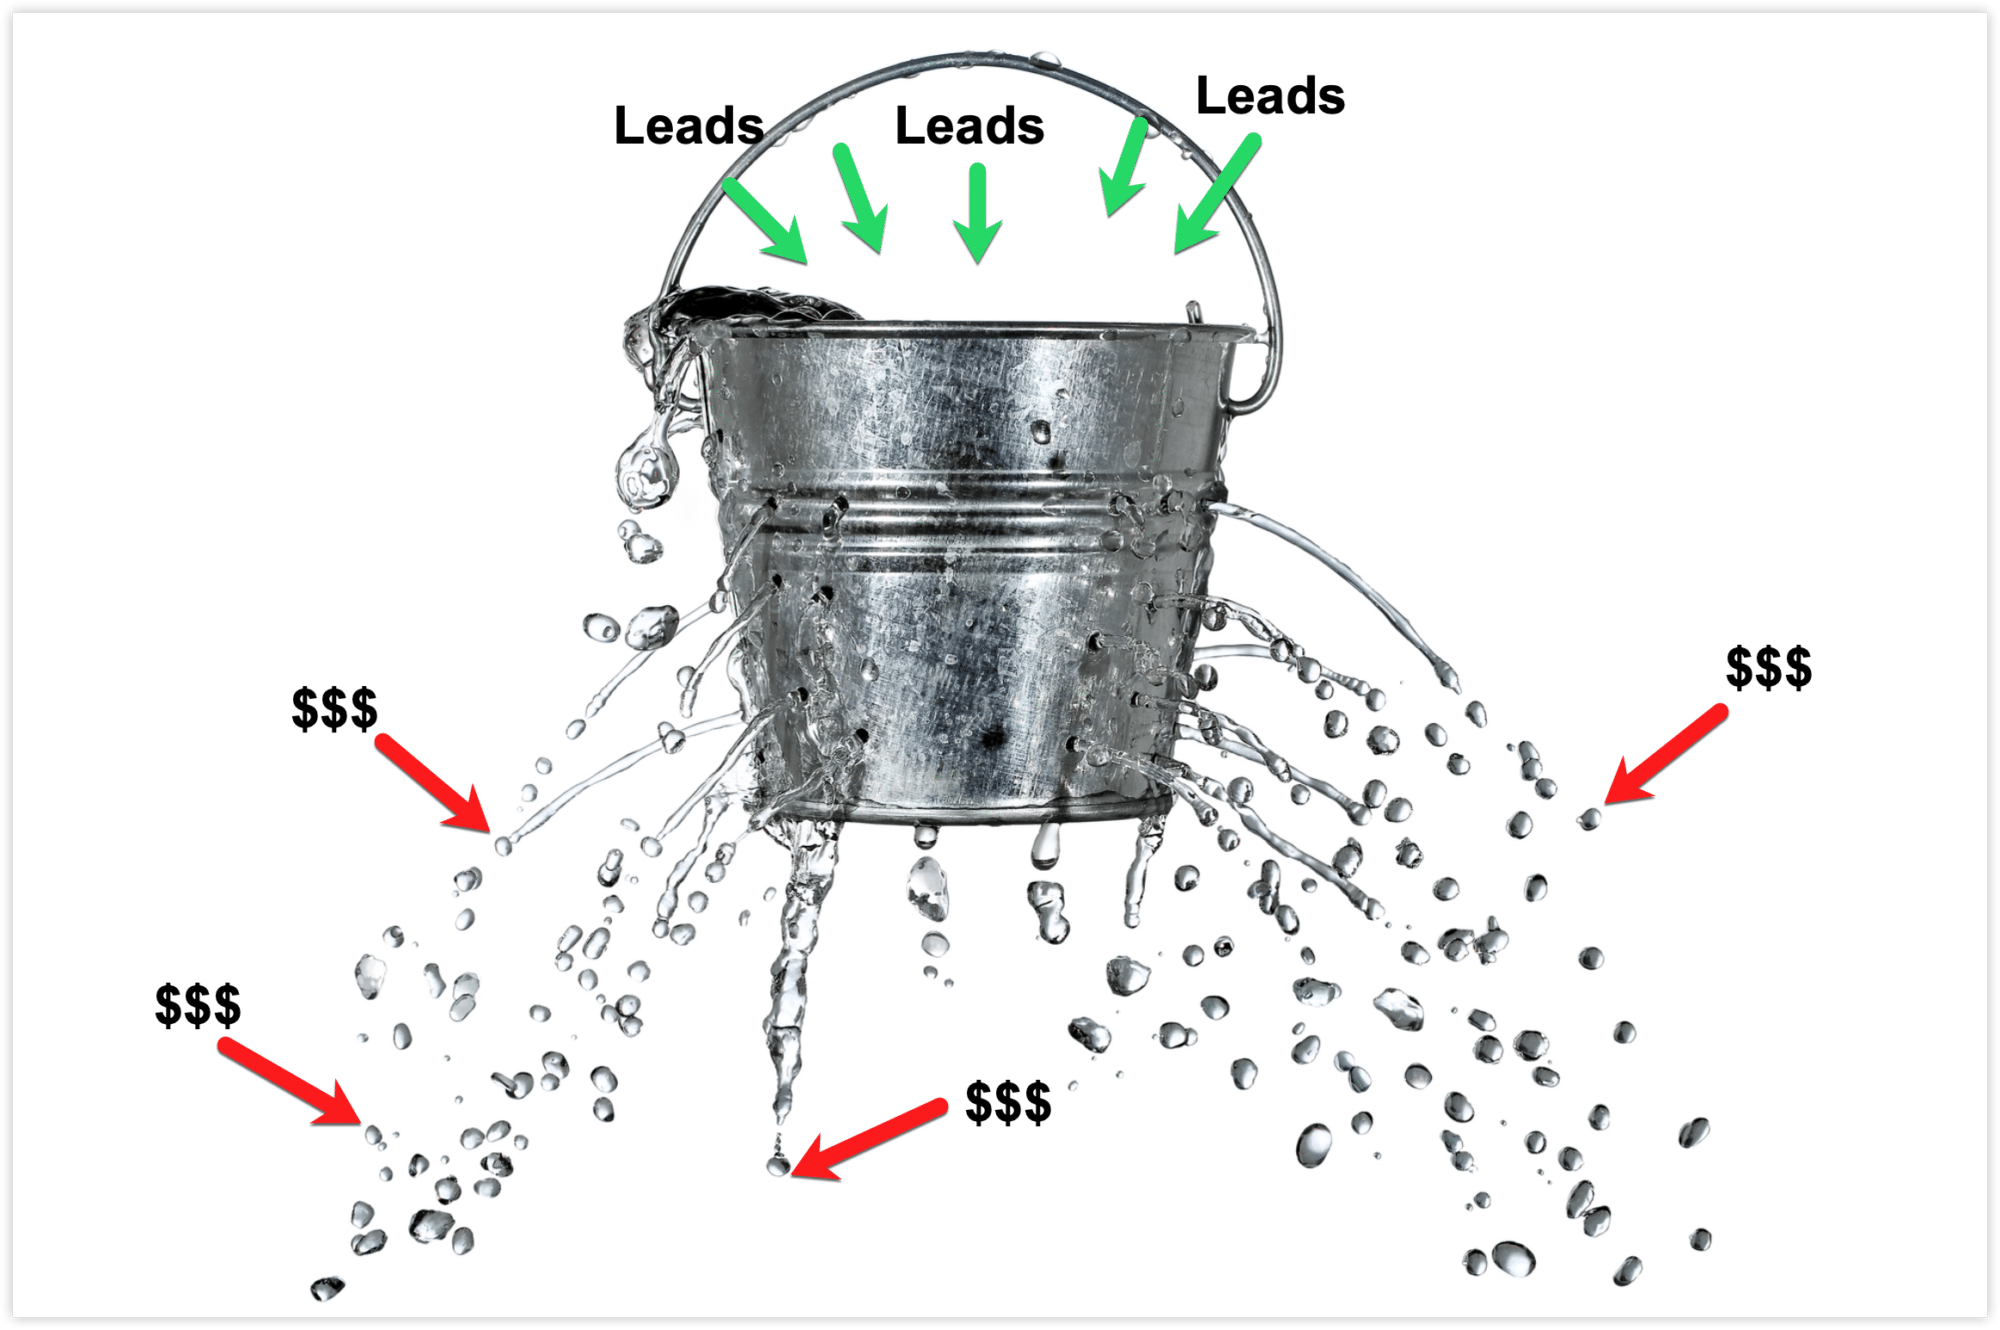 leaky bucket illustrating why a solid follow-up strategy is so crucial for real estate lead conversion